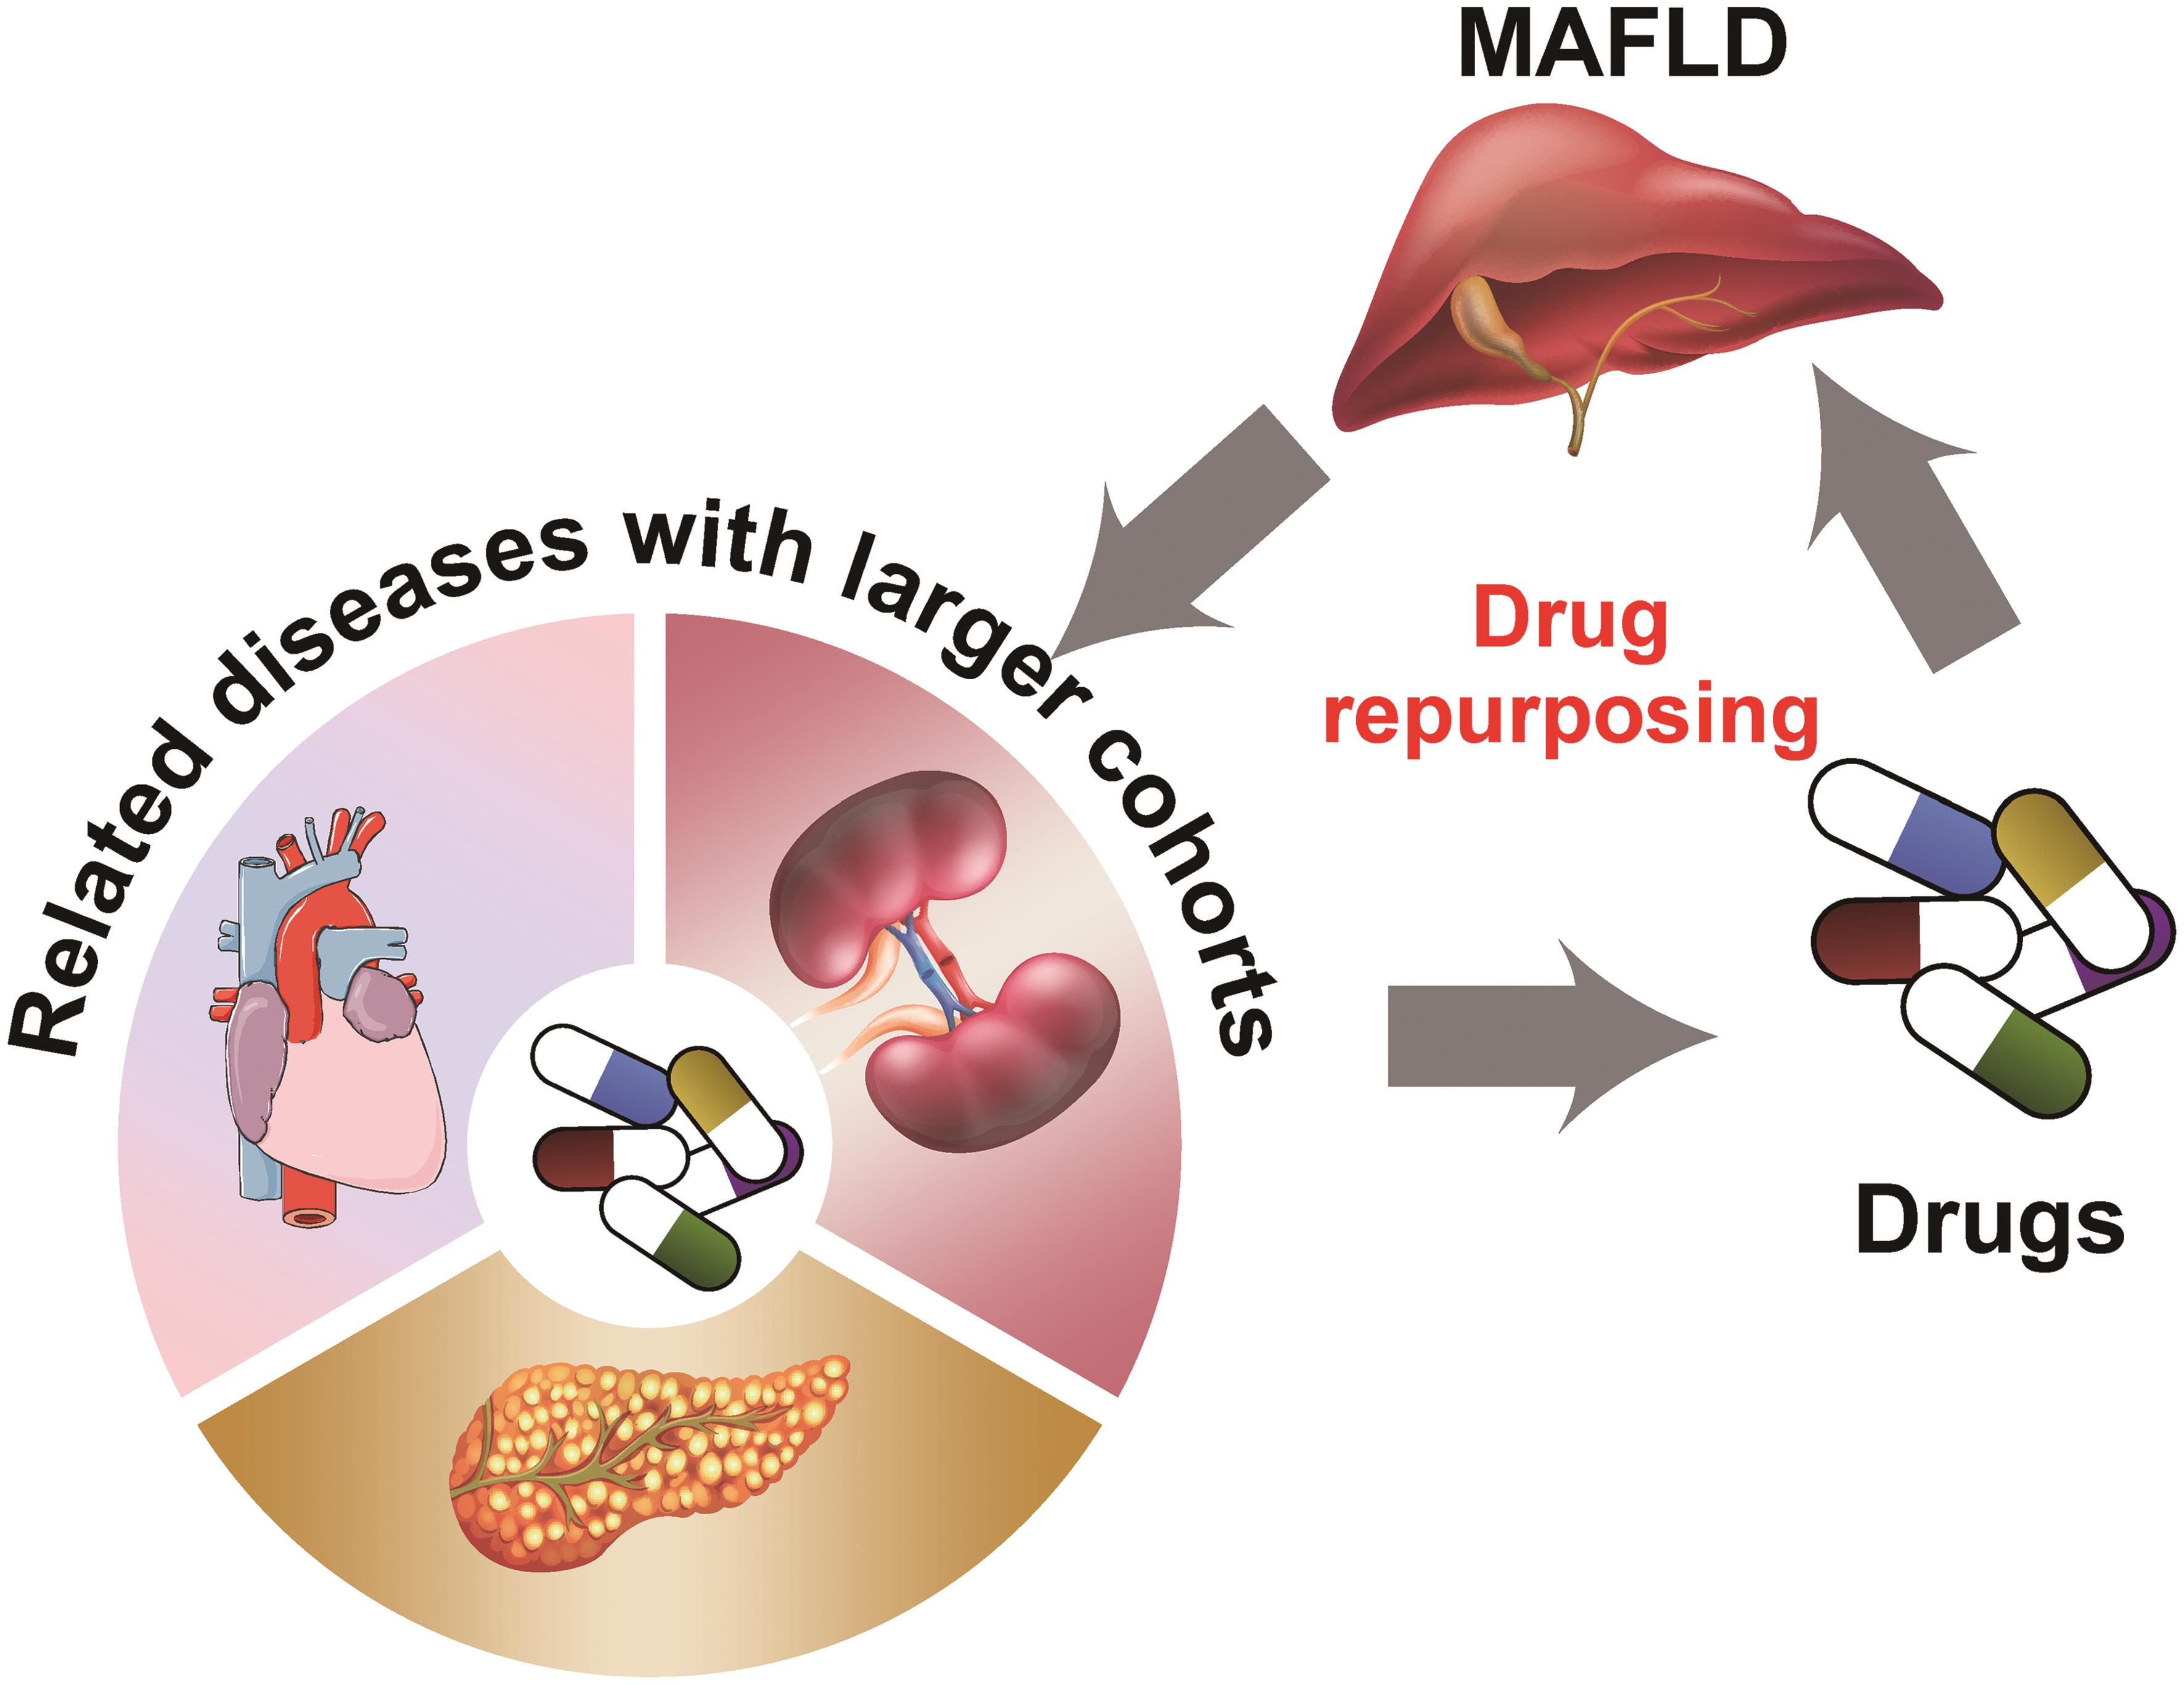 Redefinition of fatty liver disease from <italic>NAFLD</italic> to <italic>MAFLD</italic> can guide drug repurposing in fatty liver disease.